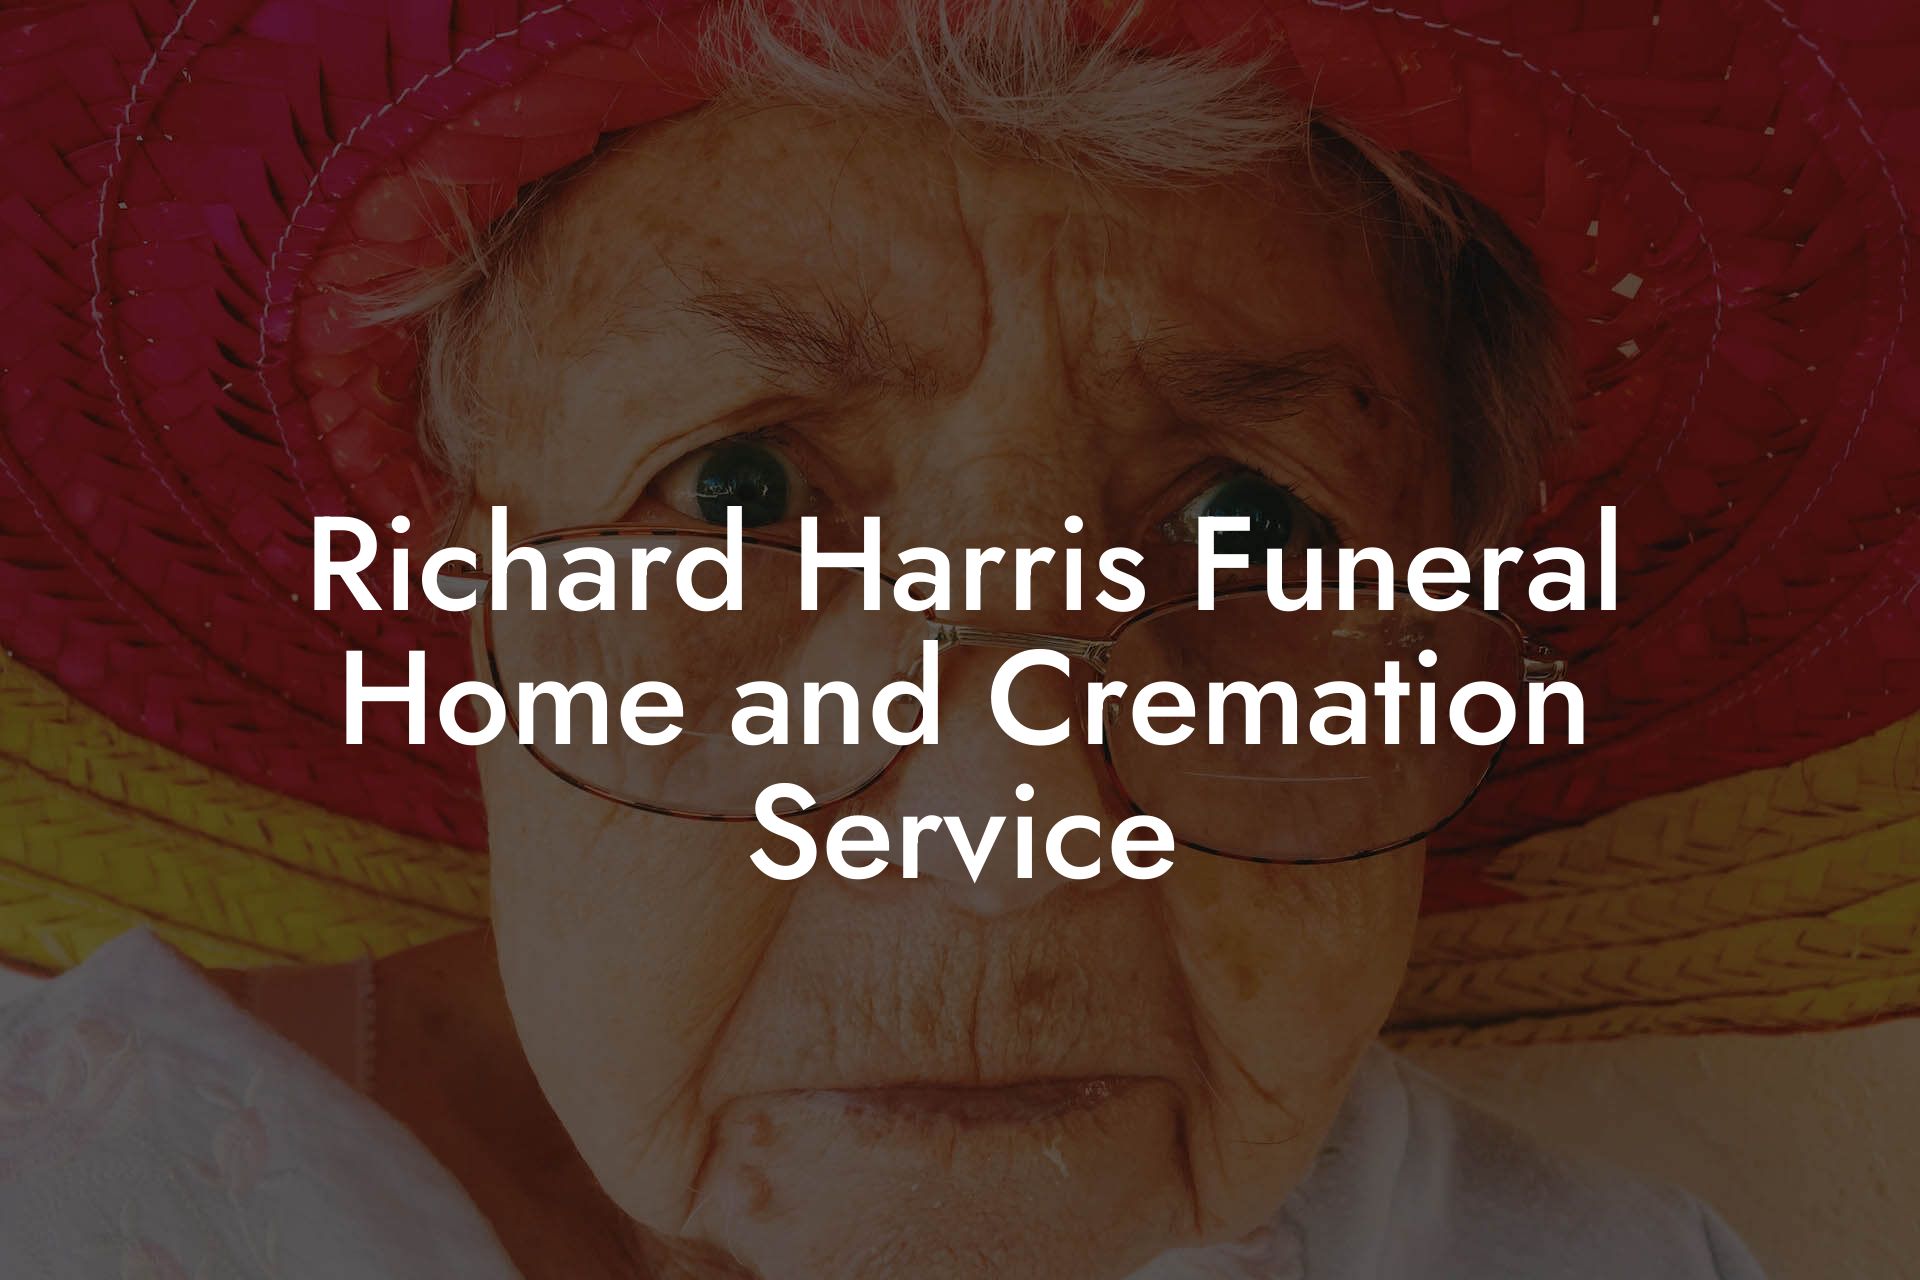 Richard Harris Funeral Home and Cremation Service